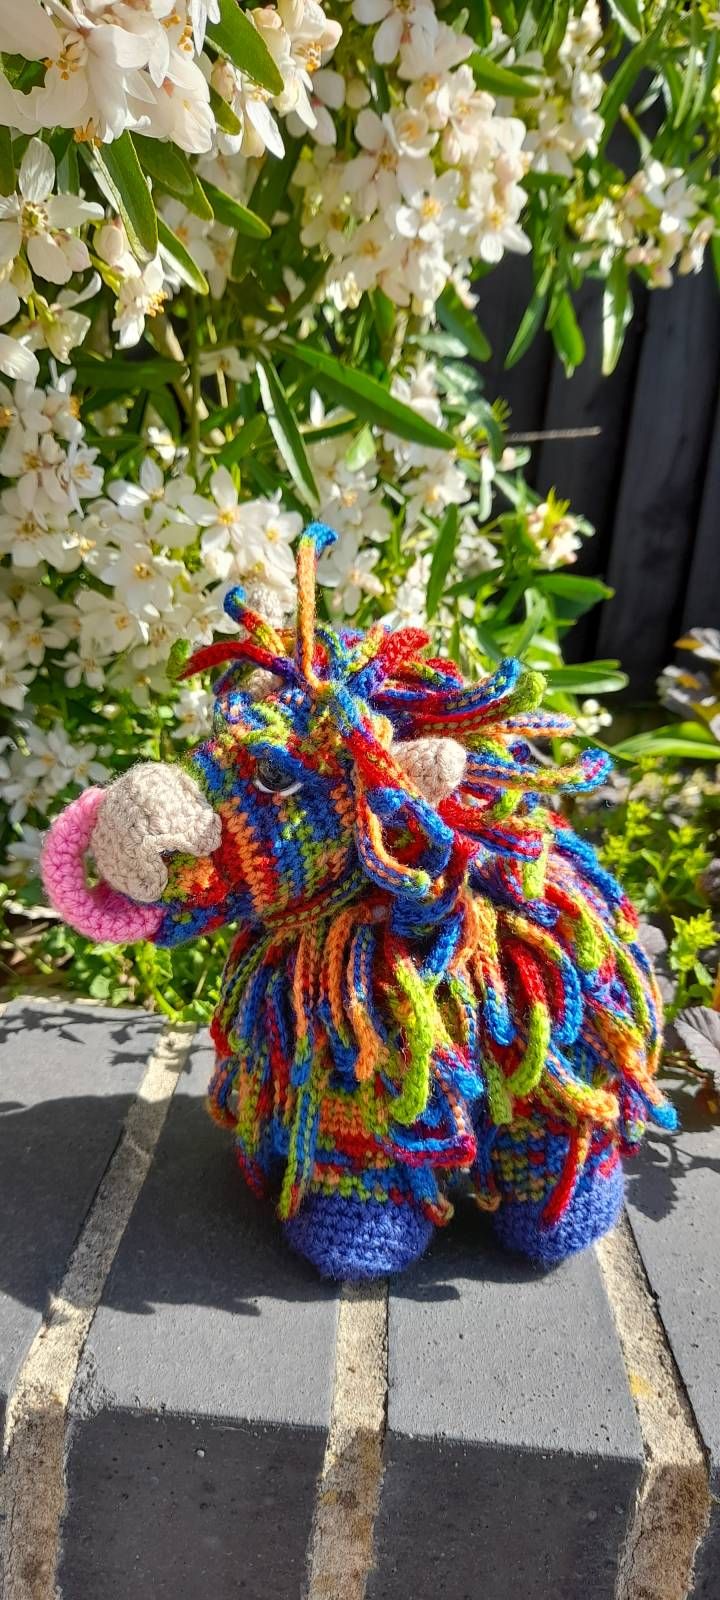 Highland Cow Crochet Amigurumi Pattern Review by Amanda Price for Cottontail Whiskers